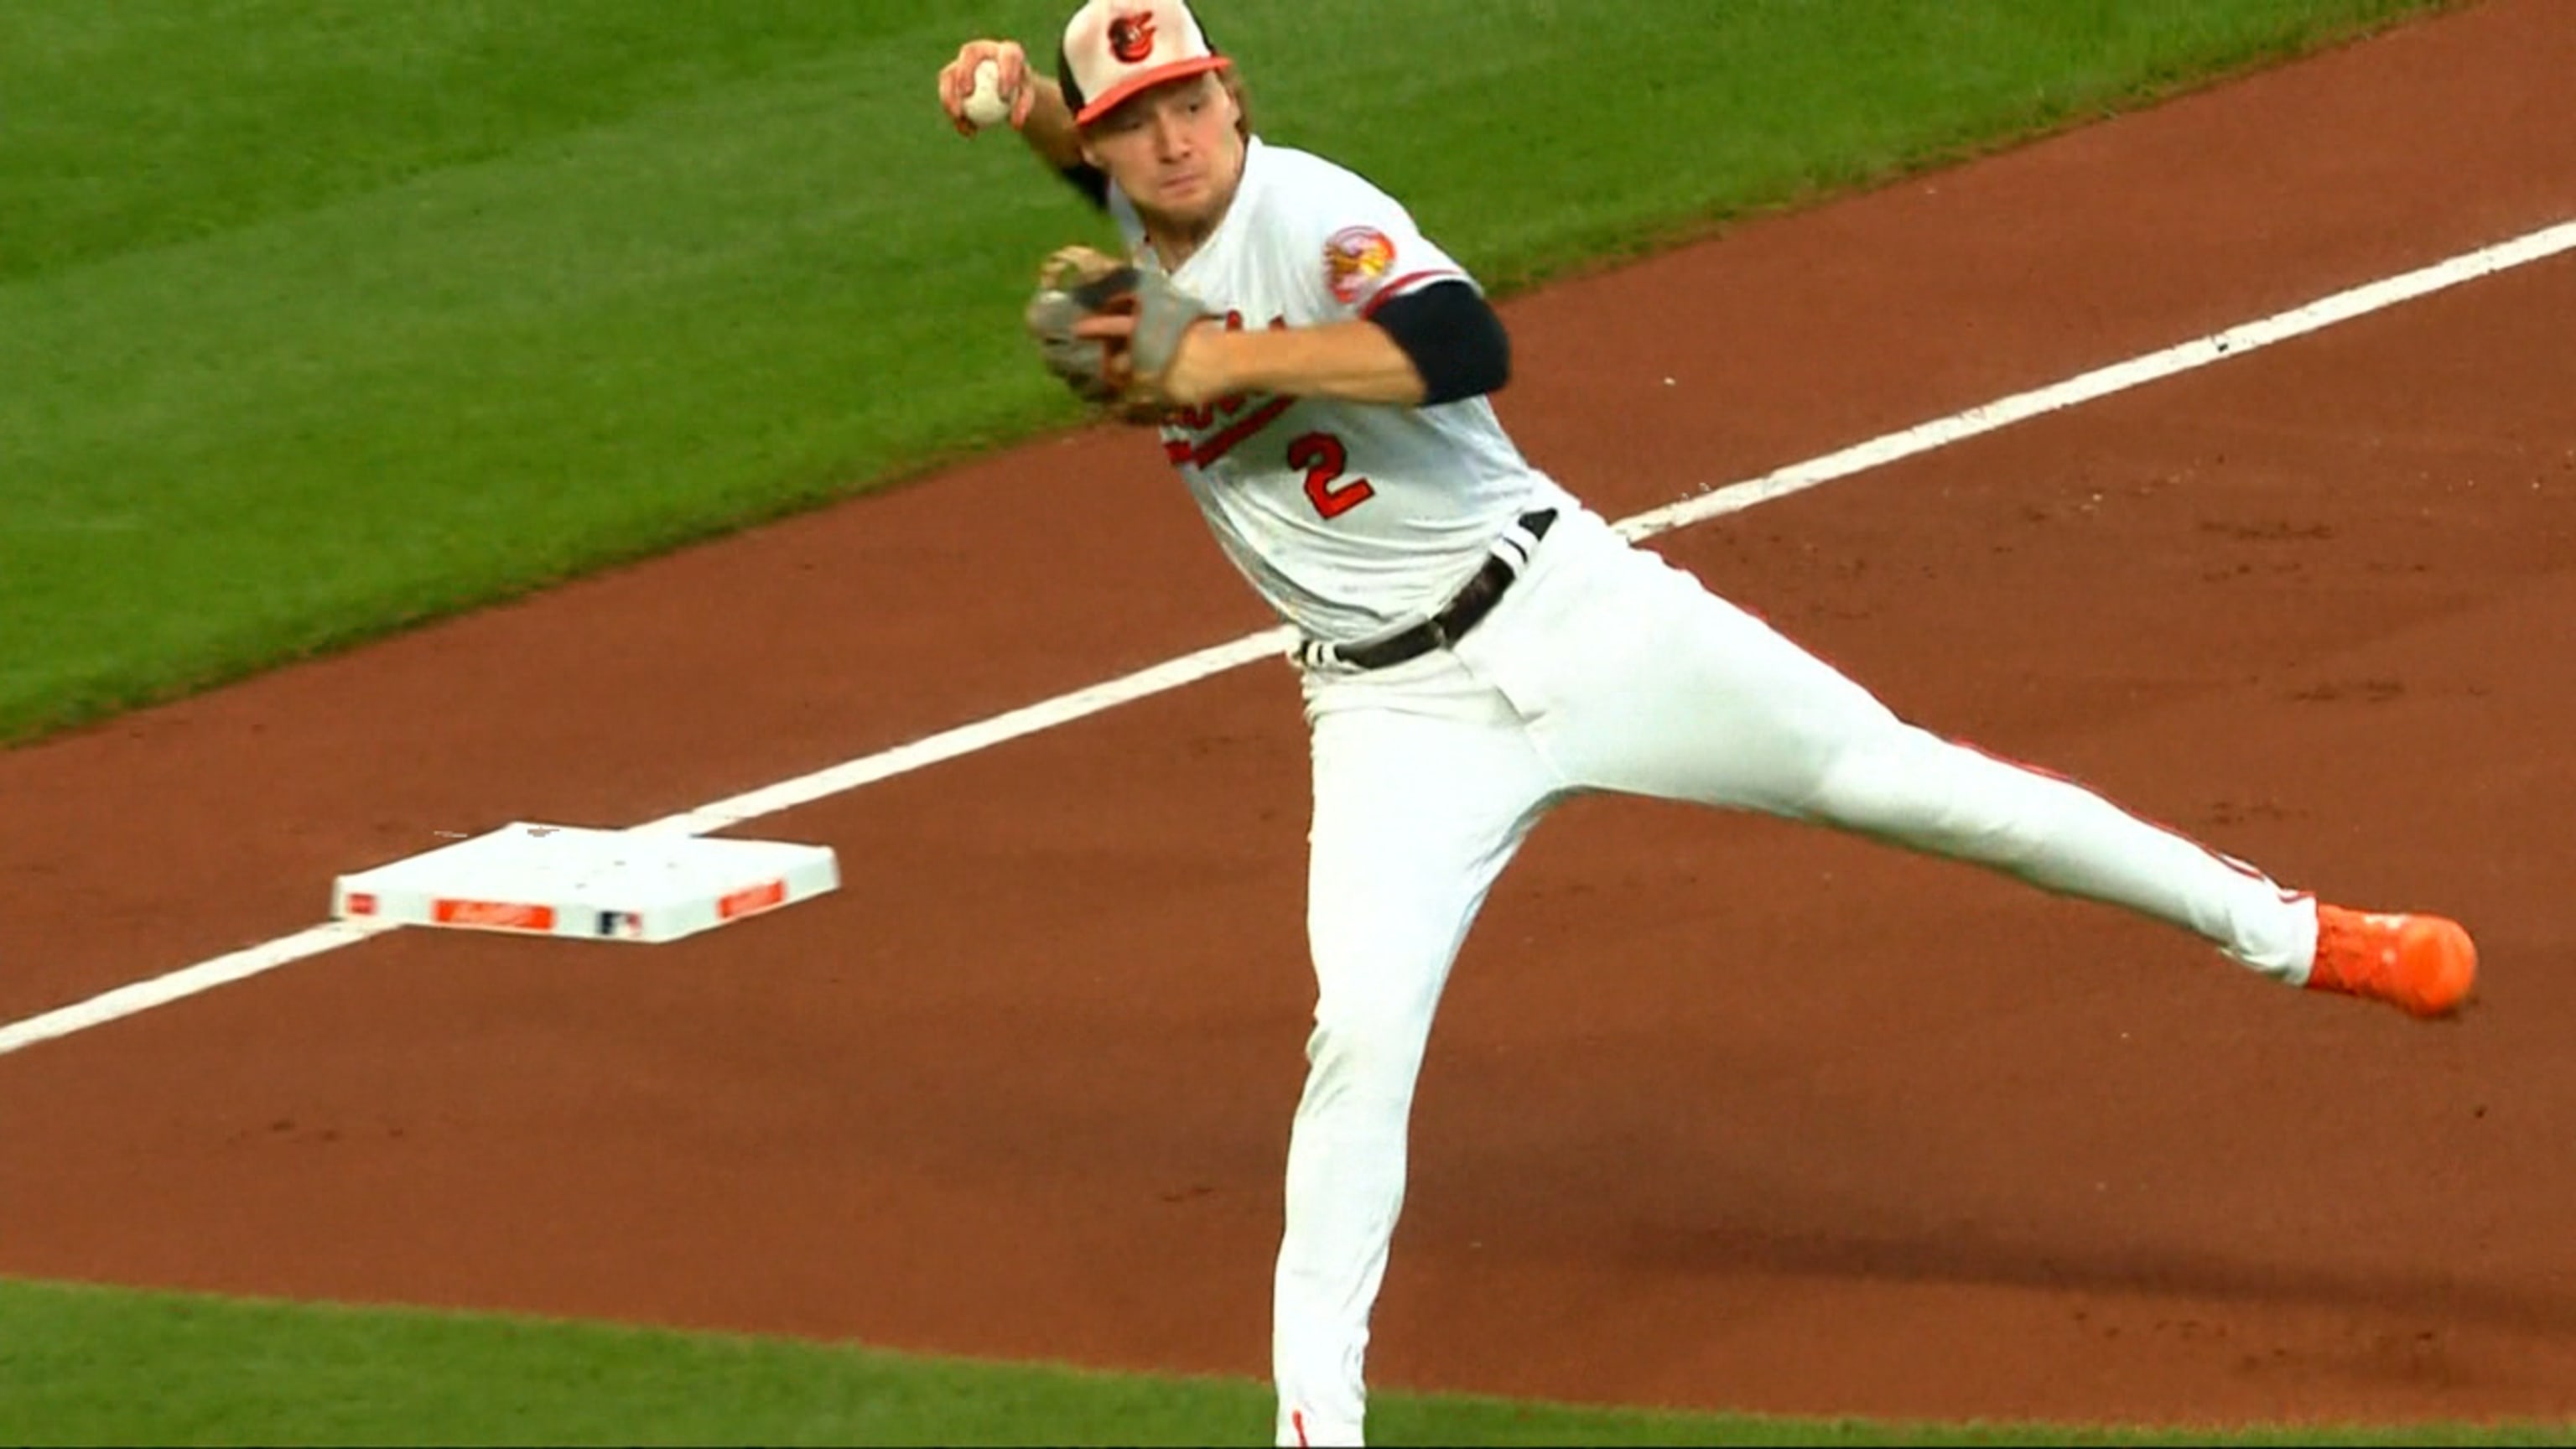 Orioles' offense quiet again in 1-0 loss to Cardinals, leaving AL